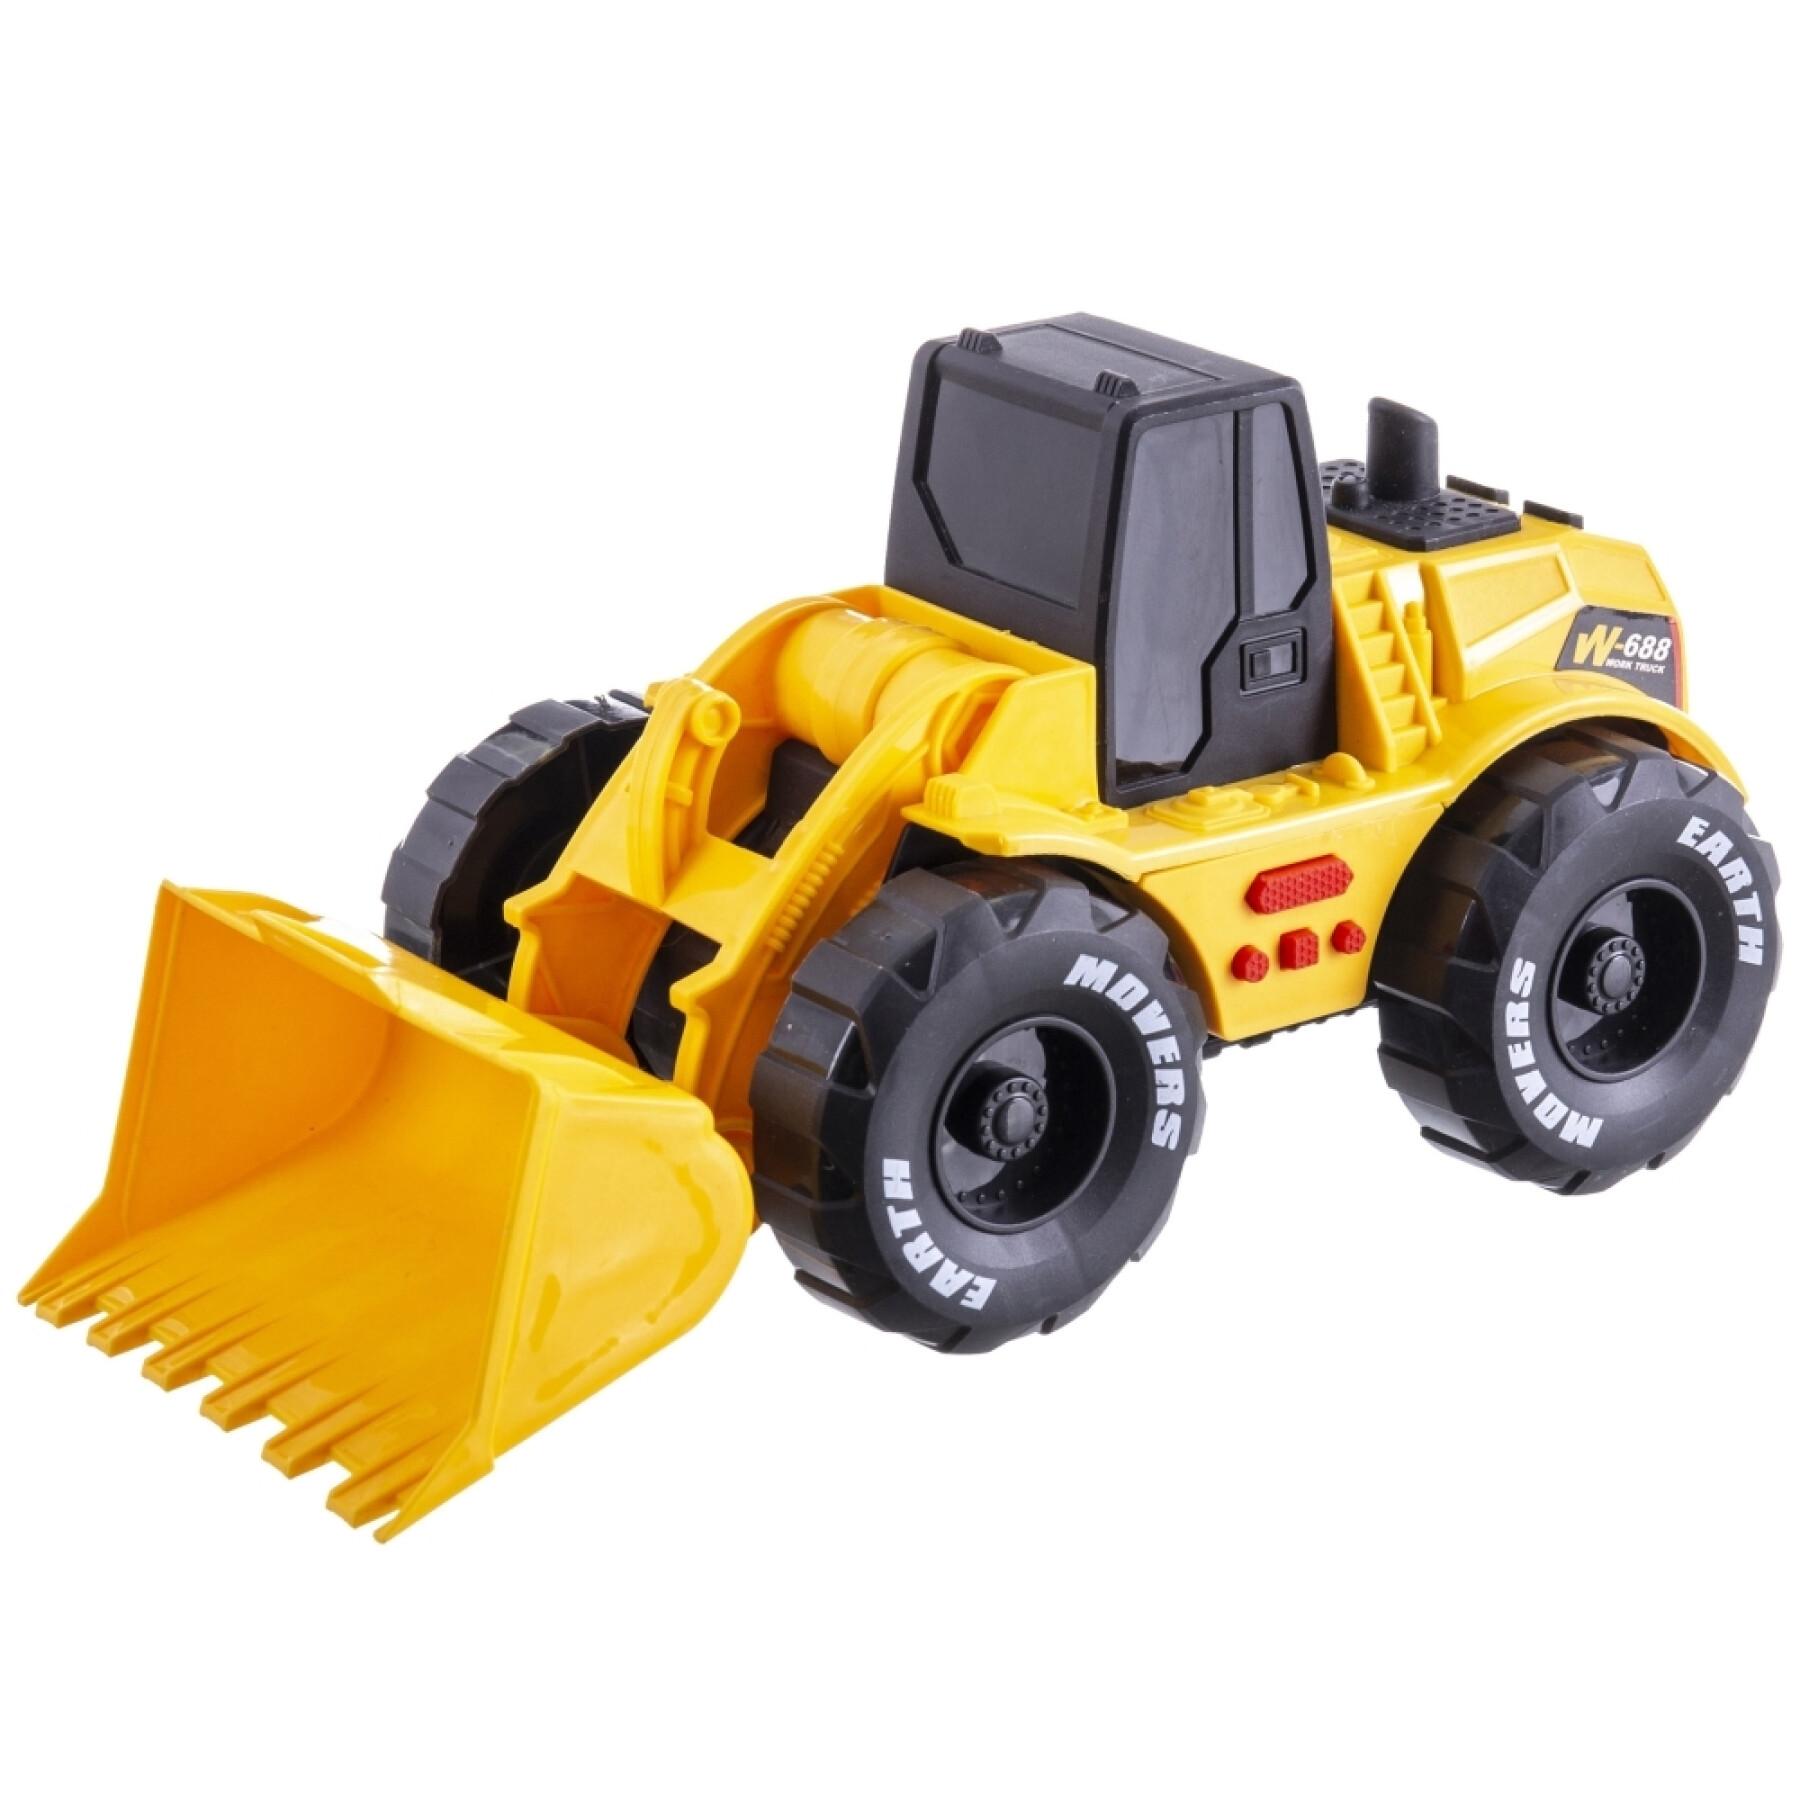 Friction excavator car games with sound and light Fantastiko 26 cm